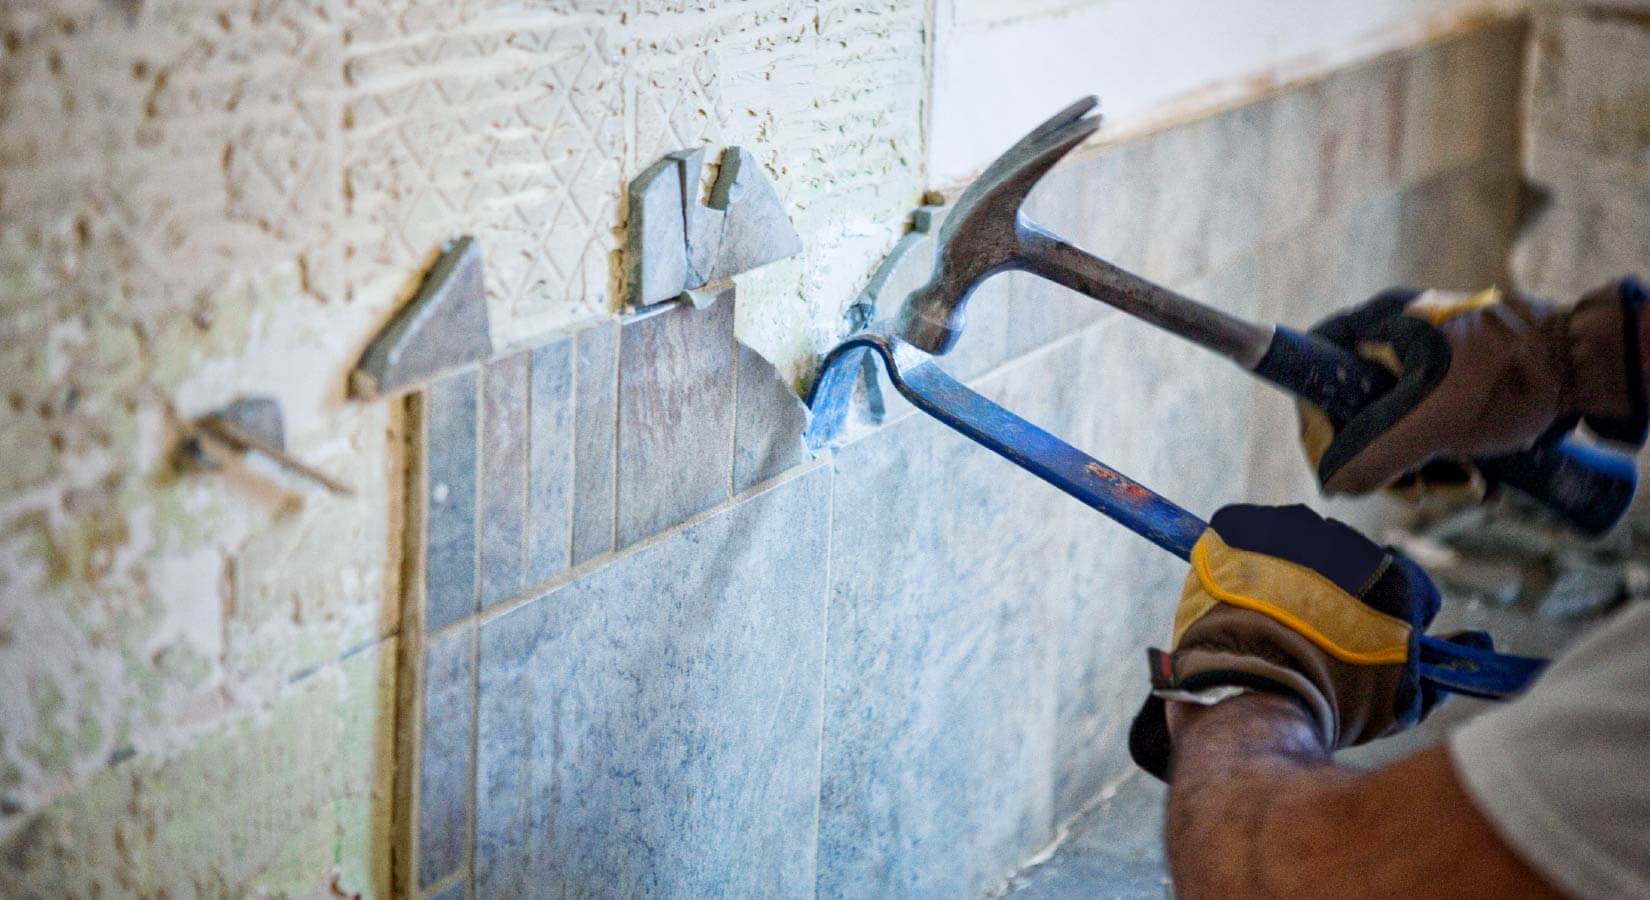 Man removing blue tile backsplash from kitchen wall with crowbar and hammer.